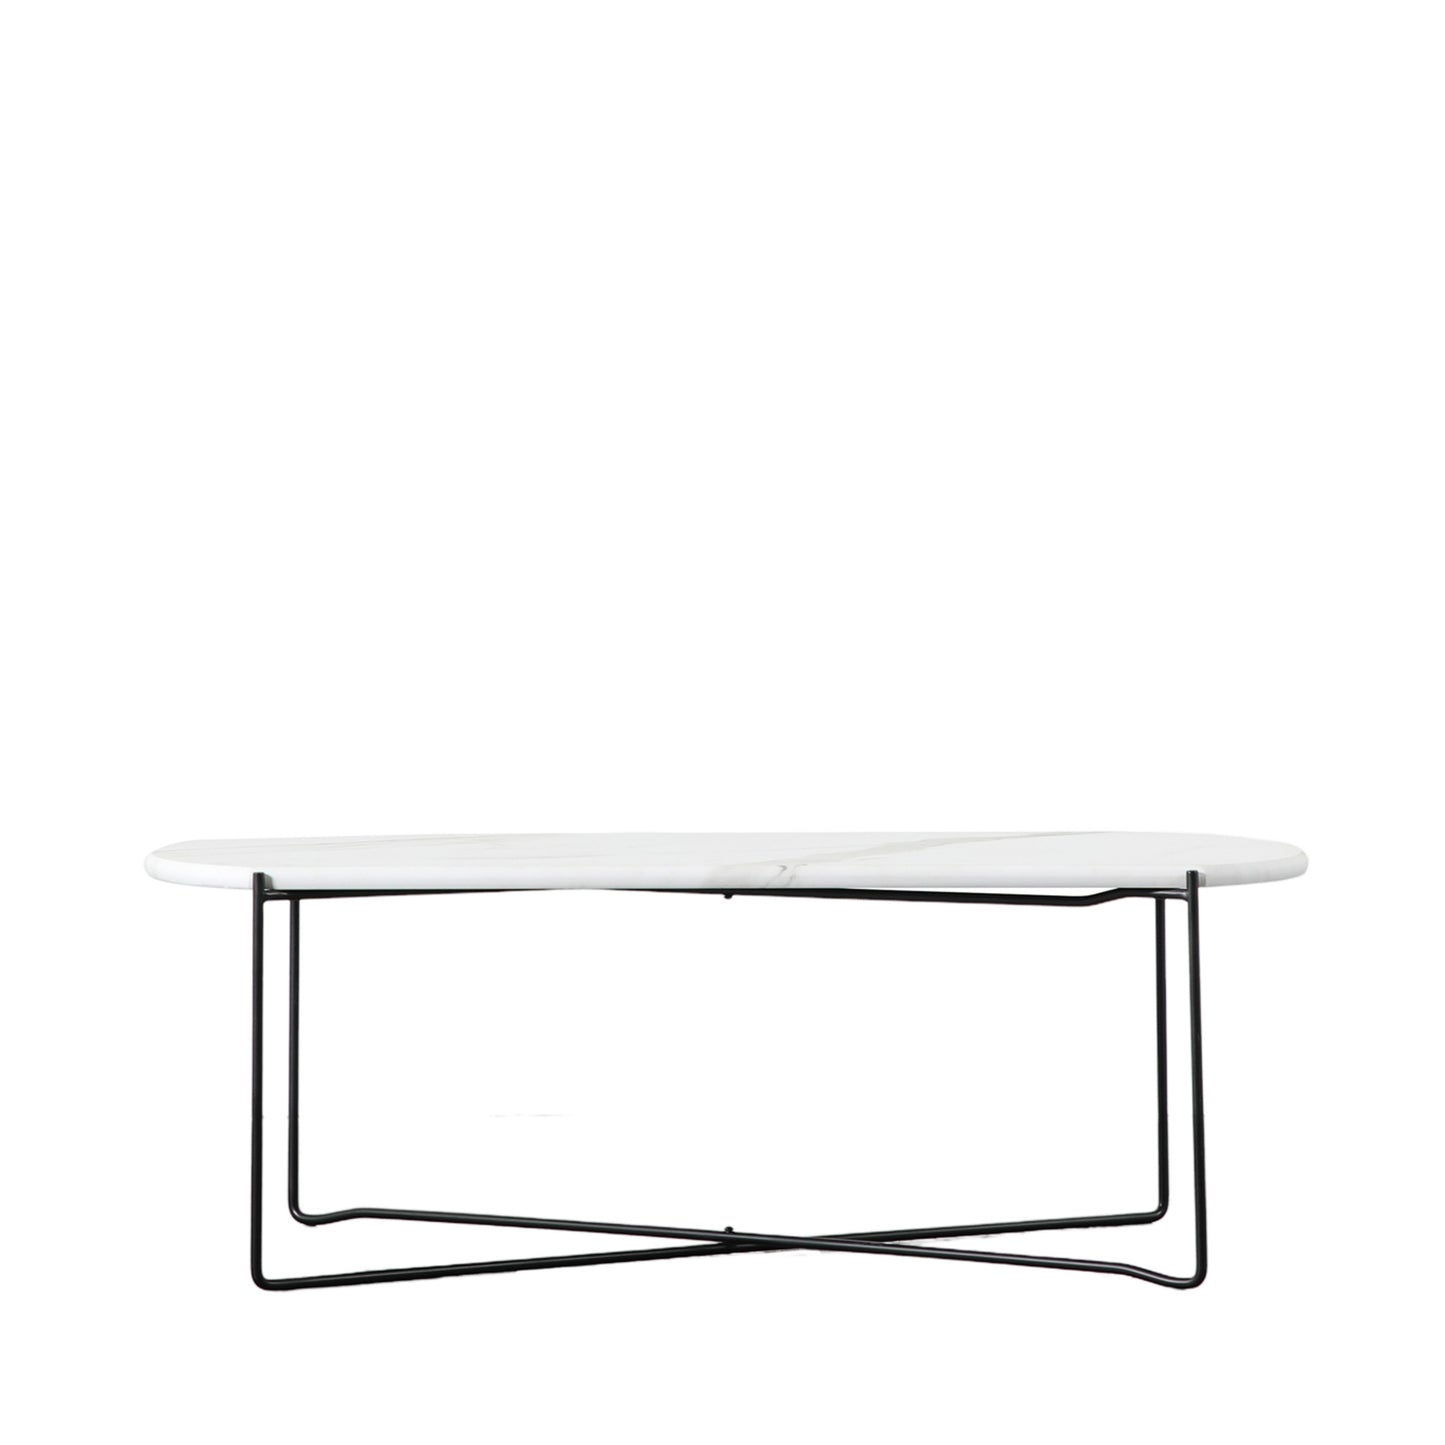 An interior decor essential, the Linford Coffee Table features a white marble top and black metal frame - available on Kikiathome.co.uk.